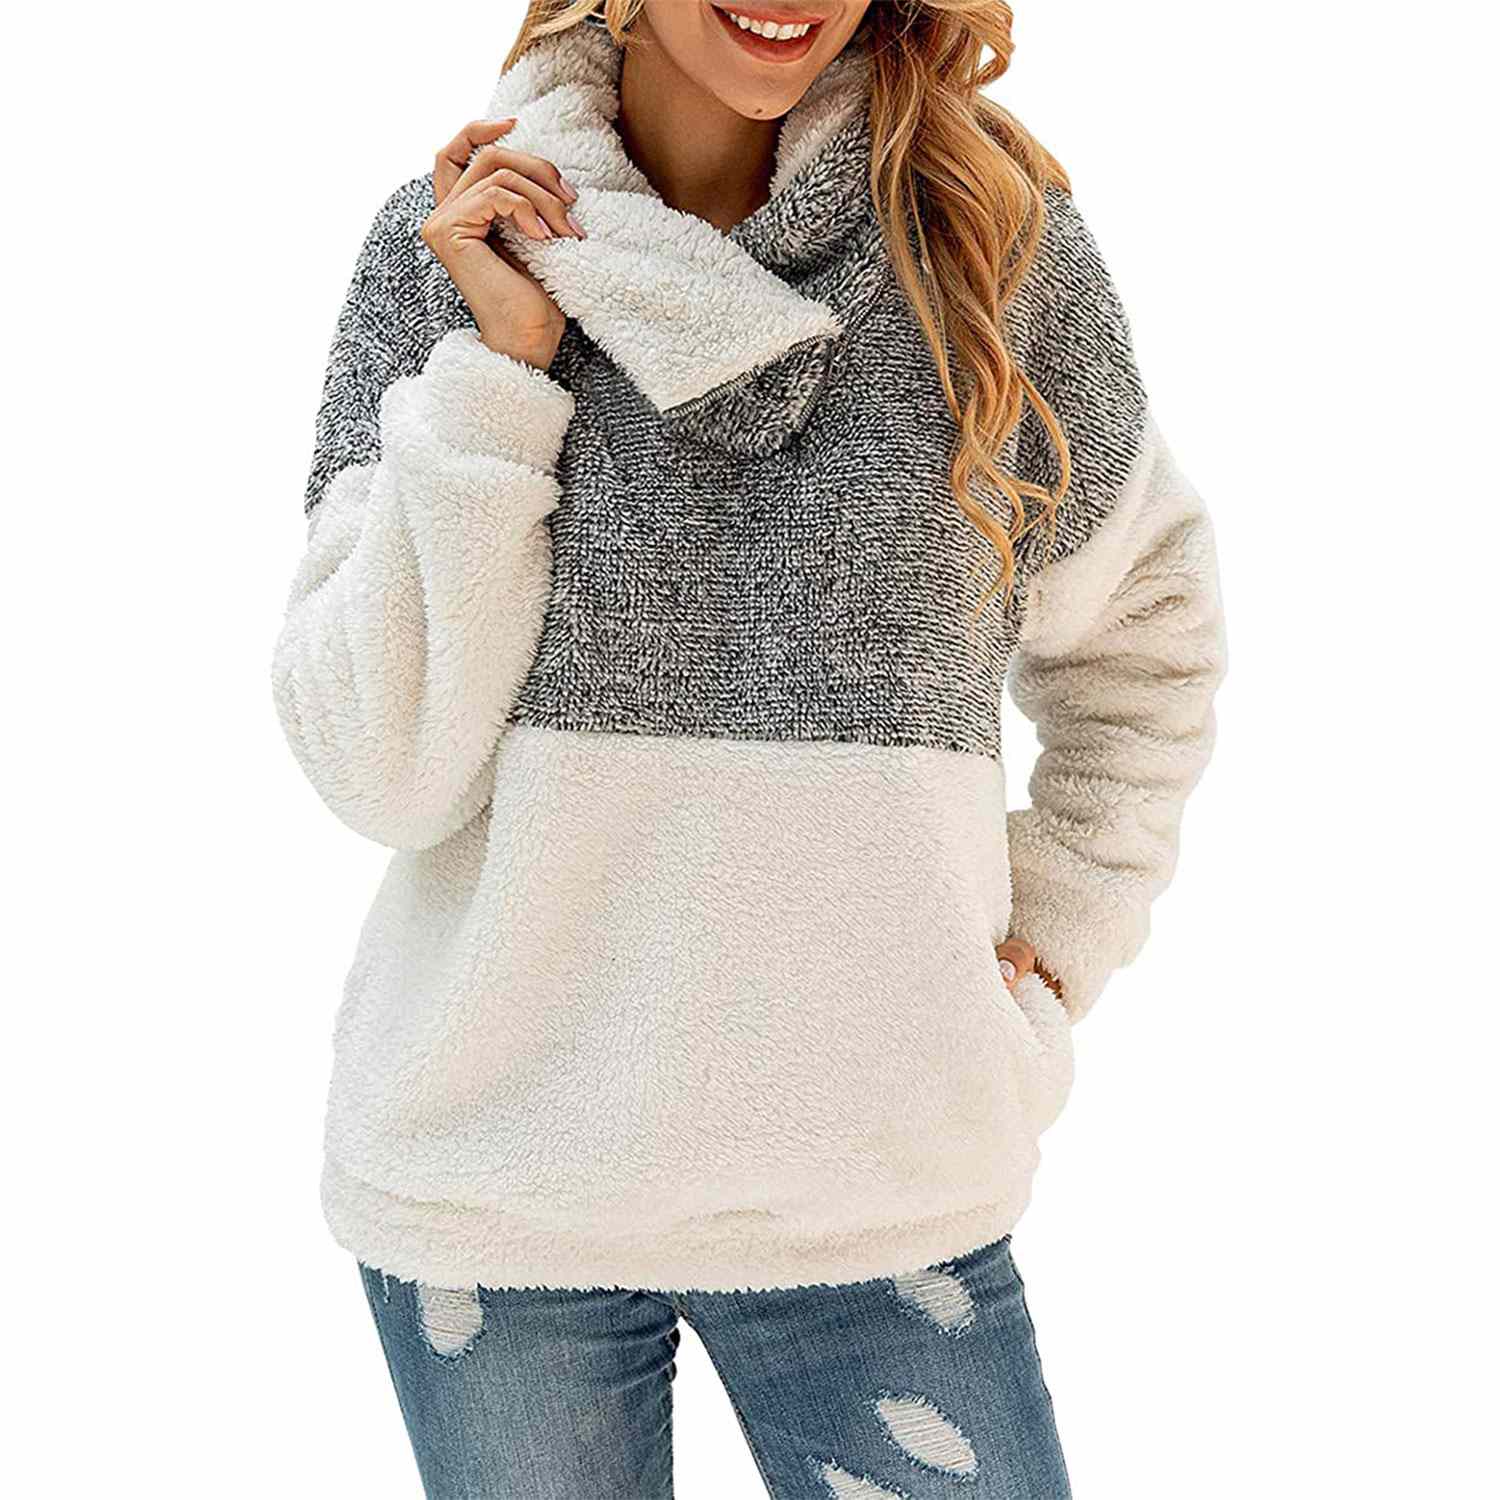 Amazon Shoppers Can’t Stop Buying This Kirundo Shaggy Sweater | PEOPLE.com